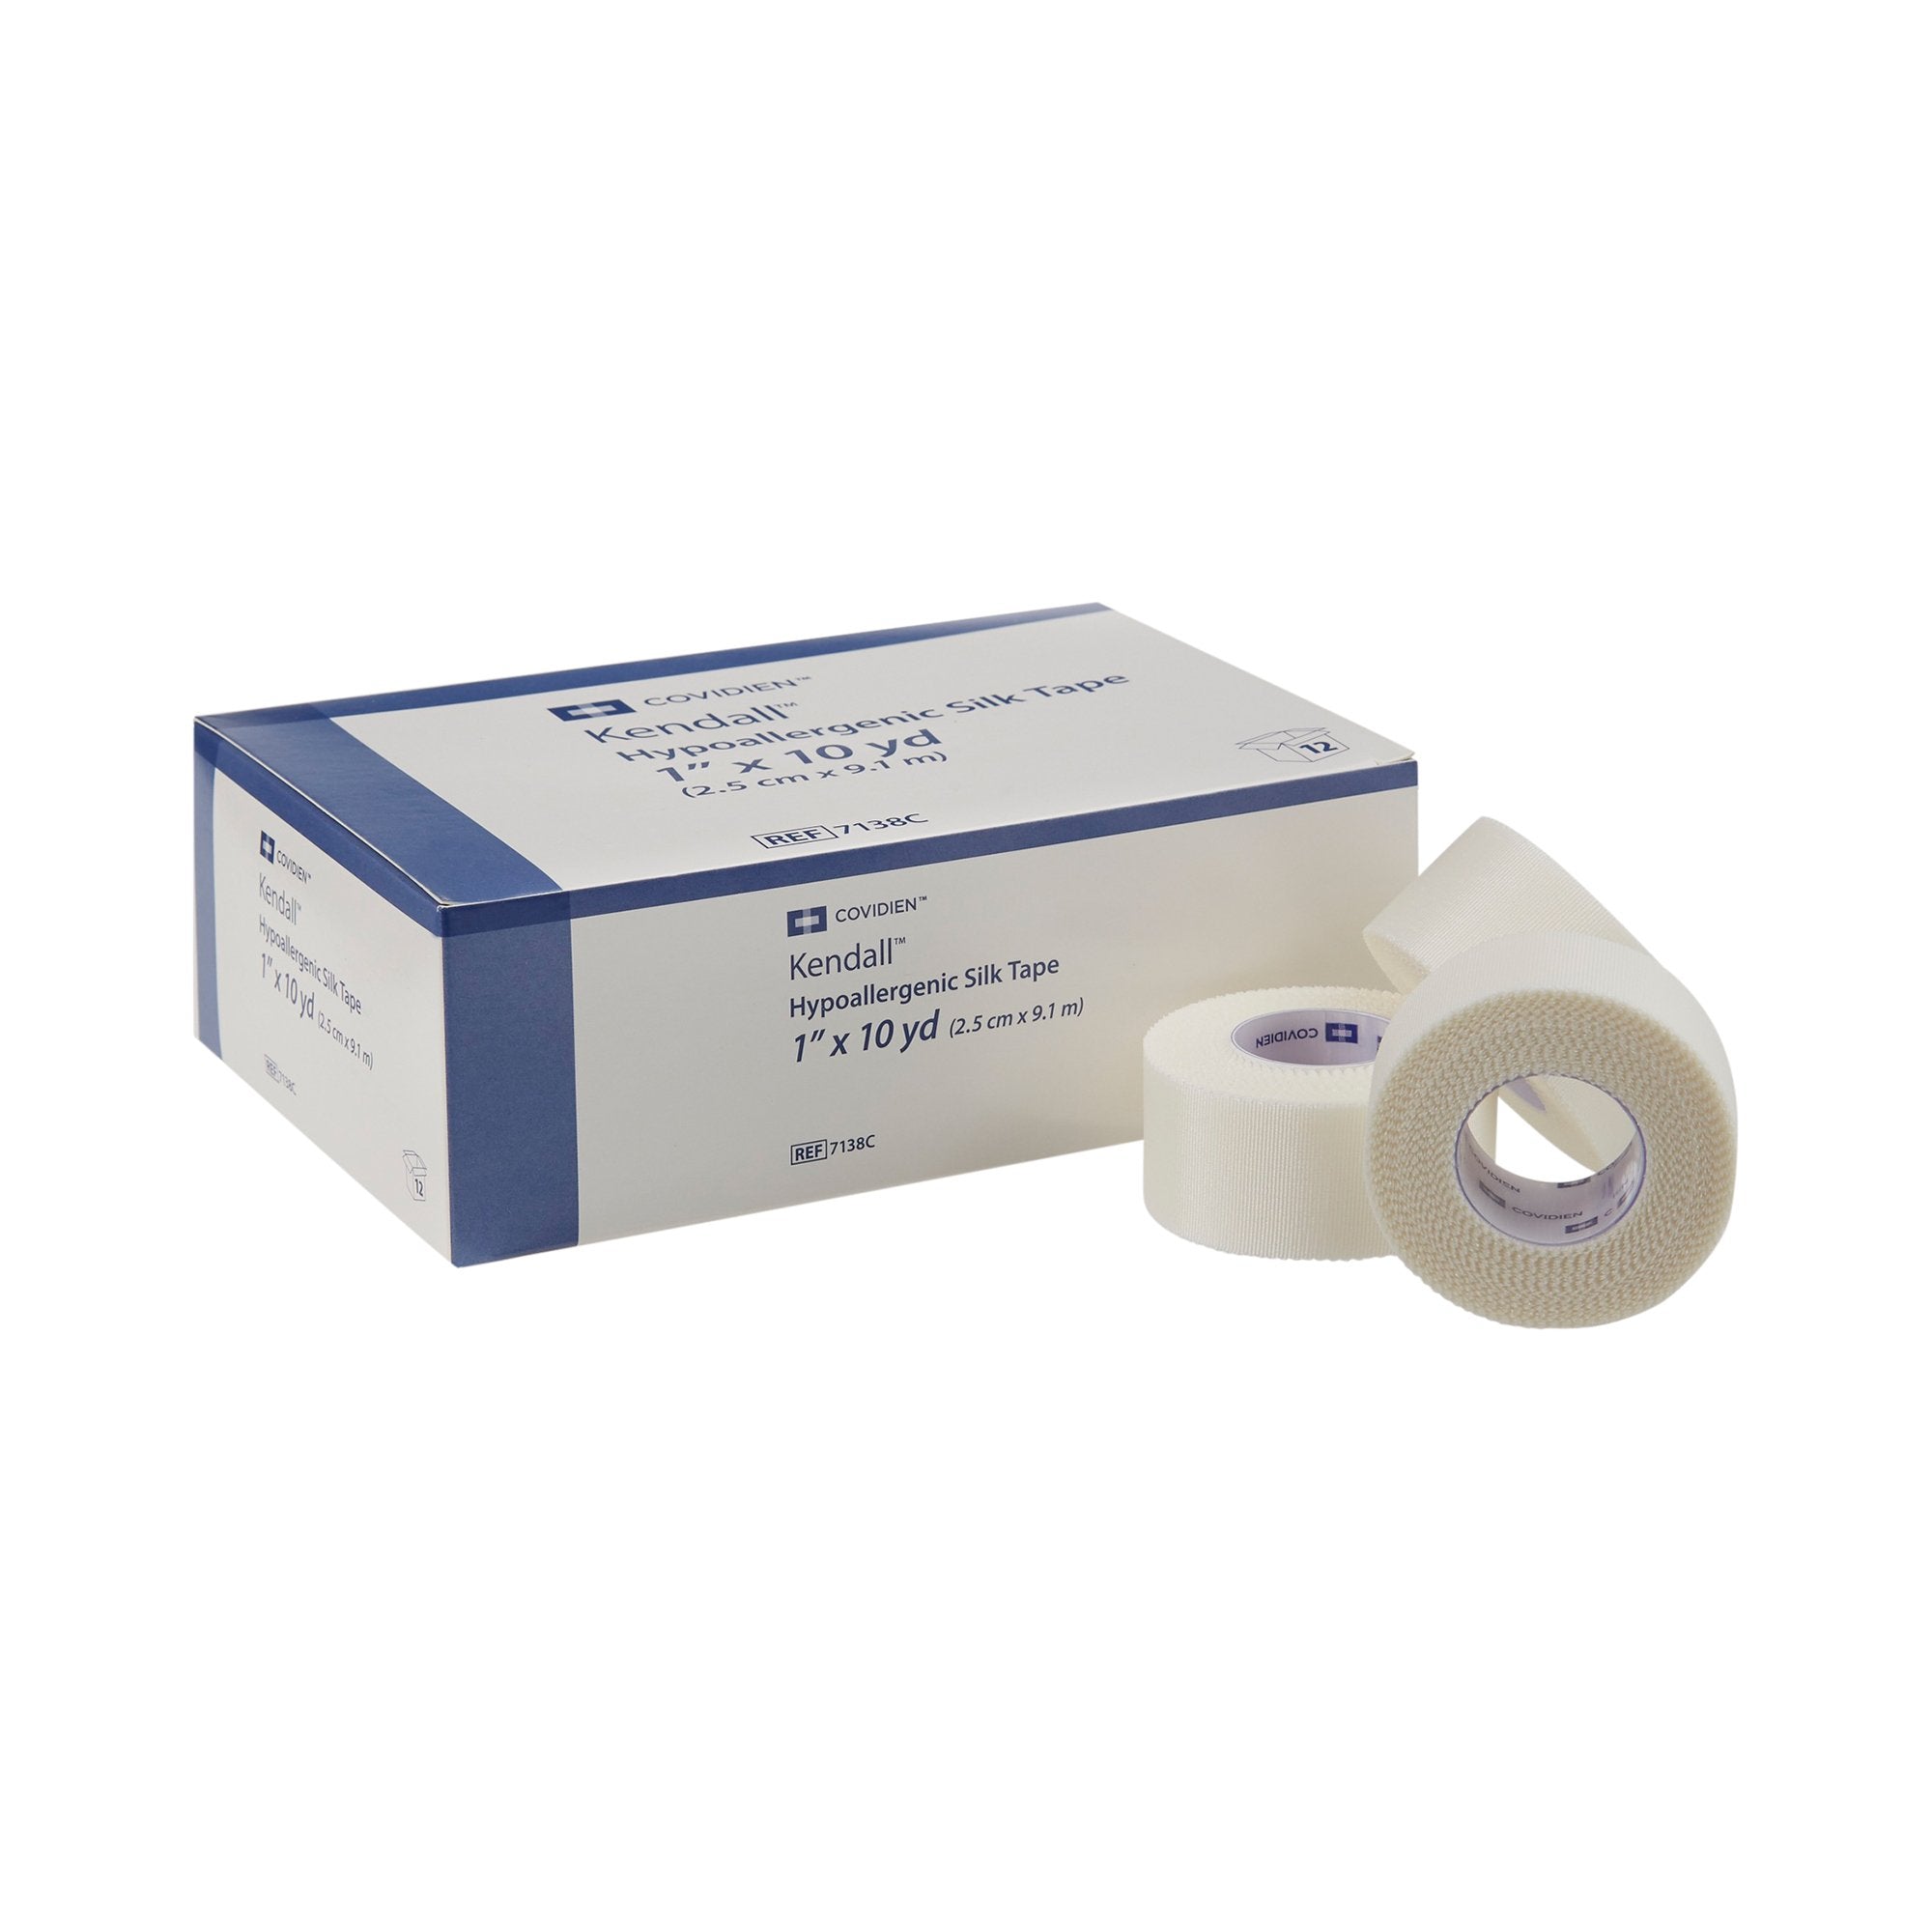 Medical Tape Kendall Hypoallergenic Silk Easy Tear Silk-Like Cloth 1 Inch X 10 Yard White NonSterile